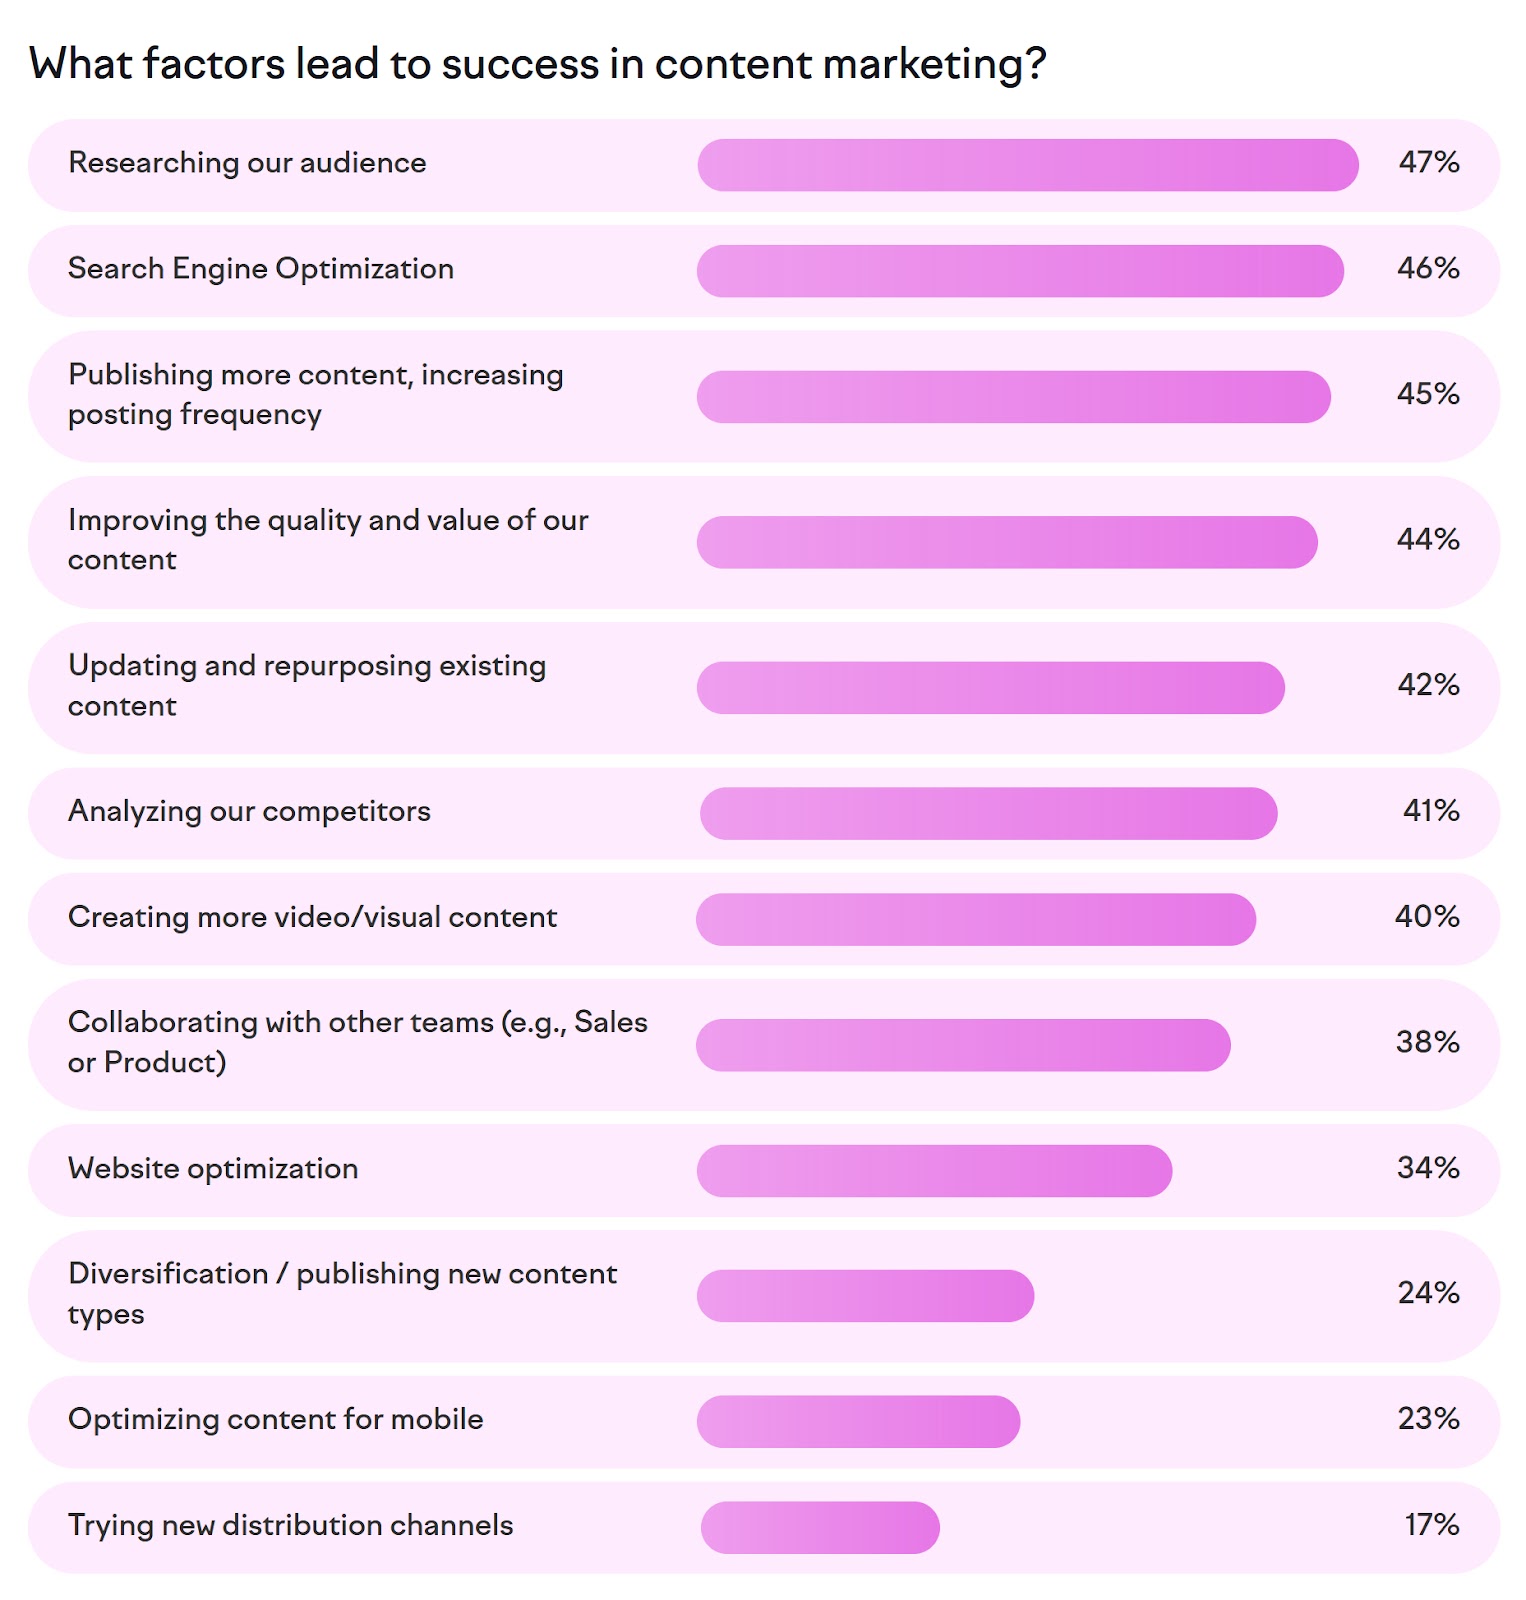 Answers to "What factors lead to success in content marketing?" from State of Content Marketing Report